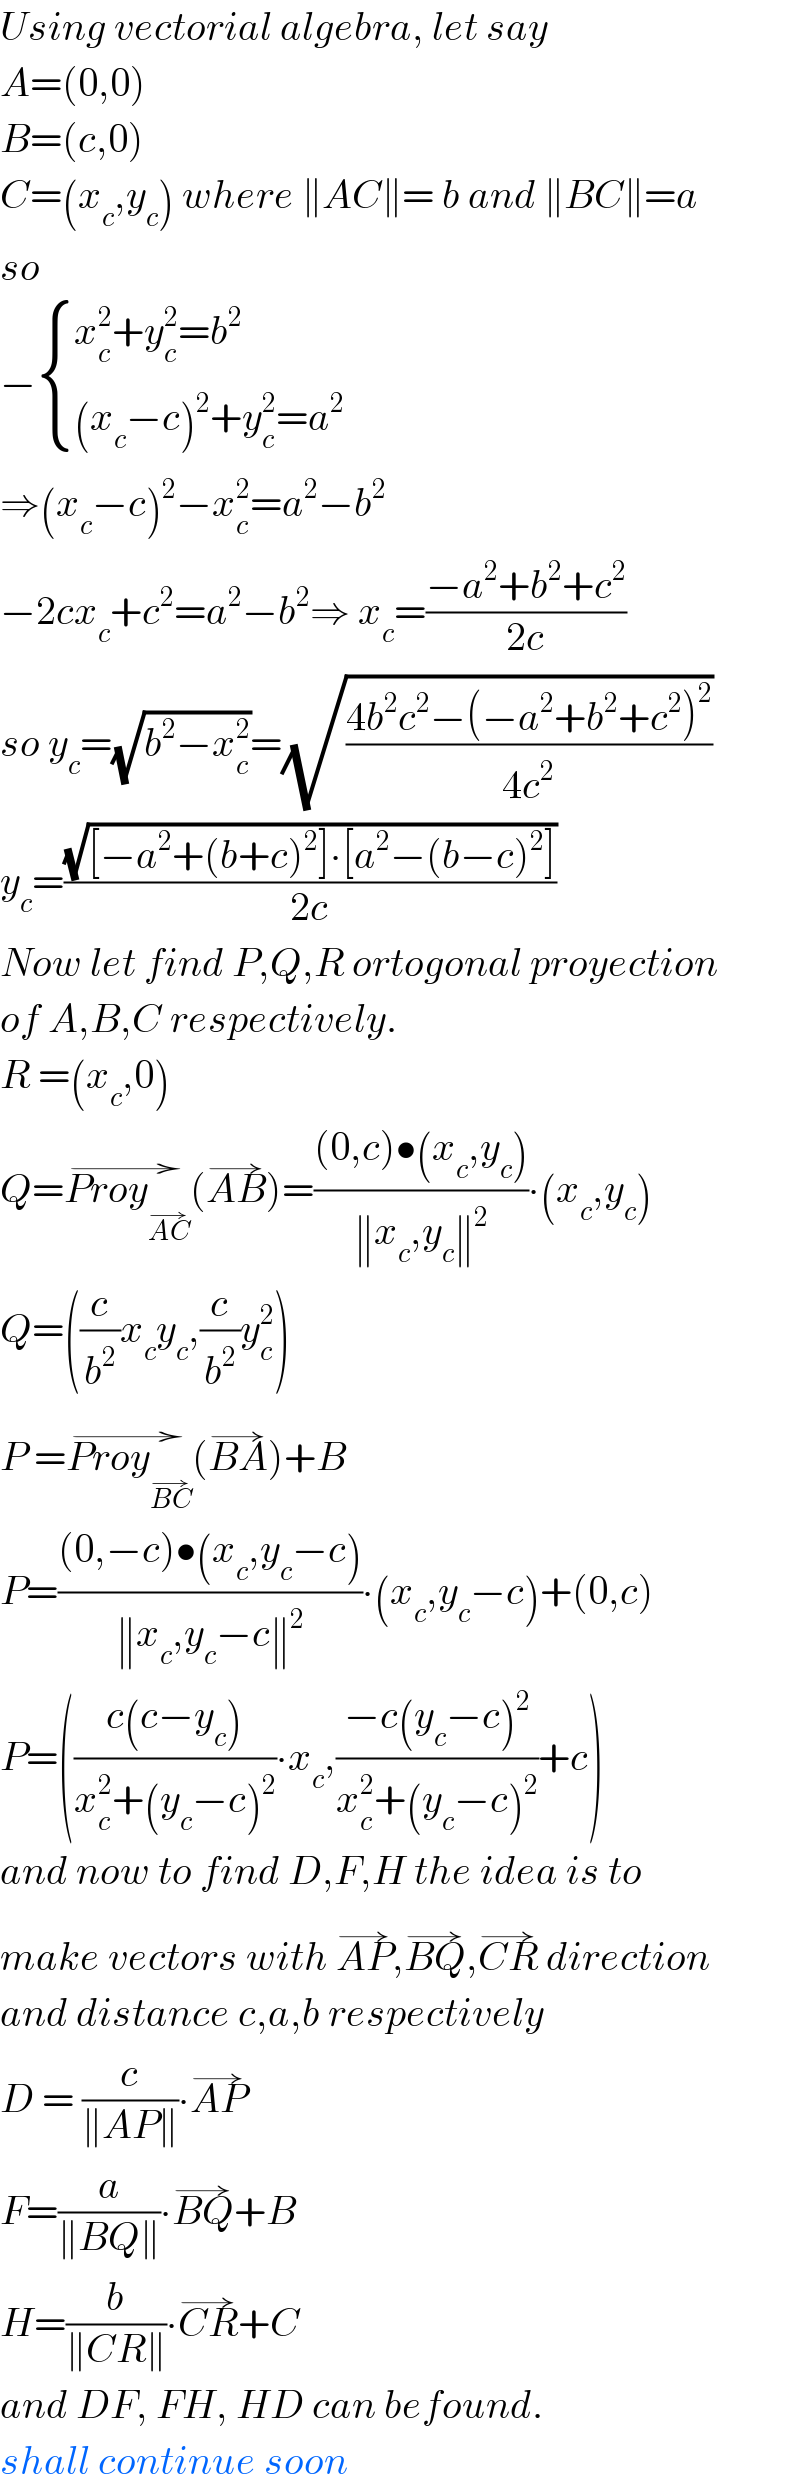 Using vectorial algebra, let say  A=(0,0)   B=(c,0)  C=(x_c ,y_c ) where ∥AC∥= b and ∥BC∥=a  so  − { ((x_c ^2 +y_c ^2 =b^2 )),(((x_c −c)^2 +y_c ^2 =a^2 )) :}  ⇒(x_c −c)^2 −x_c ^2 =a^2 −b^2   −2cx_c +c^2 =a^2 −b^2 ⇒ x_c =((−a^2 +b^2 +c^2 )/(2c))   so y_c =(√(b^2 −x_c ^2 ))=(√((4b^2 c^2 −(−a^2 +b^2 +c^2 )^2 )/(4c^2 )))  y_c =((√([−a^2 +(b+c)^2 ]∙[a^2 −(b−c)^2 ]))/(2c))  Now let find P,Q,R ortogonal proyection  of A,B,C respectively.  R =(x_c ,0)  Q=Proy_(AC^(→) ) ^(→) (AB^(→) )=(((0,c)•(x_c ,y_c ))/(∥x_c ,y_c ∥^2 ))∙(x_c ,y_c )  Q=((c/b^2 )x_c y_c ,(c/b^2 )y_c ^2 )  P =Proy_(BC^(→) ) ^(→) (BA^(→) )+B  P=(((0,−c)•(x_c ,y_c −c))/(∥x_c ,y_c −c∥^2 ))∙(x_c ,y_c −c)+(0,c)  P=(((c(c−y_c ))/(x_c ^2 +(y_c −c)^2 ))∙x_c ,((−c(y_c −c)^2 )/(x_c ^2 +(y_c −c)^2 ))+c)  and now to find D,F,H the idea is to  make vectors with AP^(→) ,BQ^(→) ,CR^(→)  direction  and distance c,a,b respectively  D = (c/(∥AP∥))∙AP^(→)   F=(a/(∥BQ∥))∙BQ^(→) +B  H=(b/(∥CR∥))∙CR^(→) +C  and DF, FH, HD can befound.  shall continue soon  